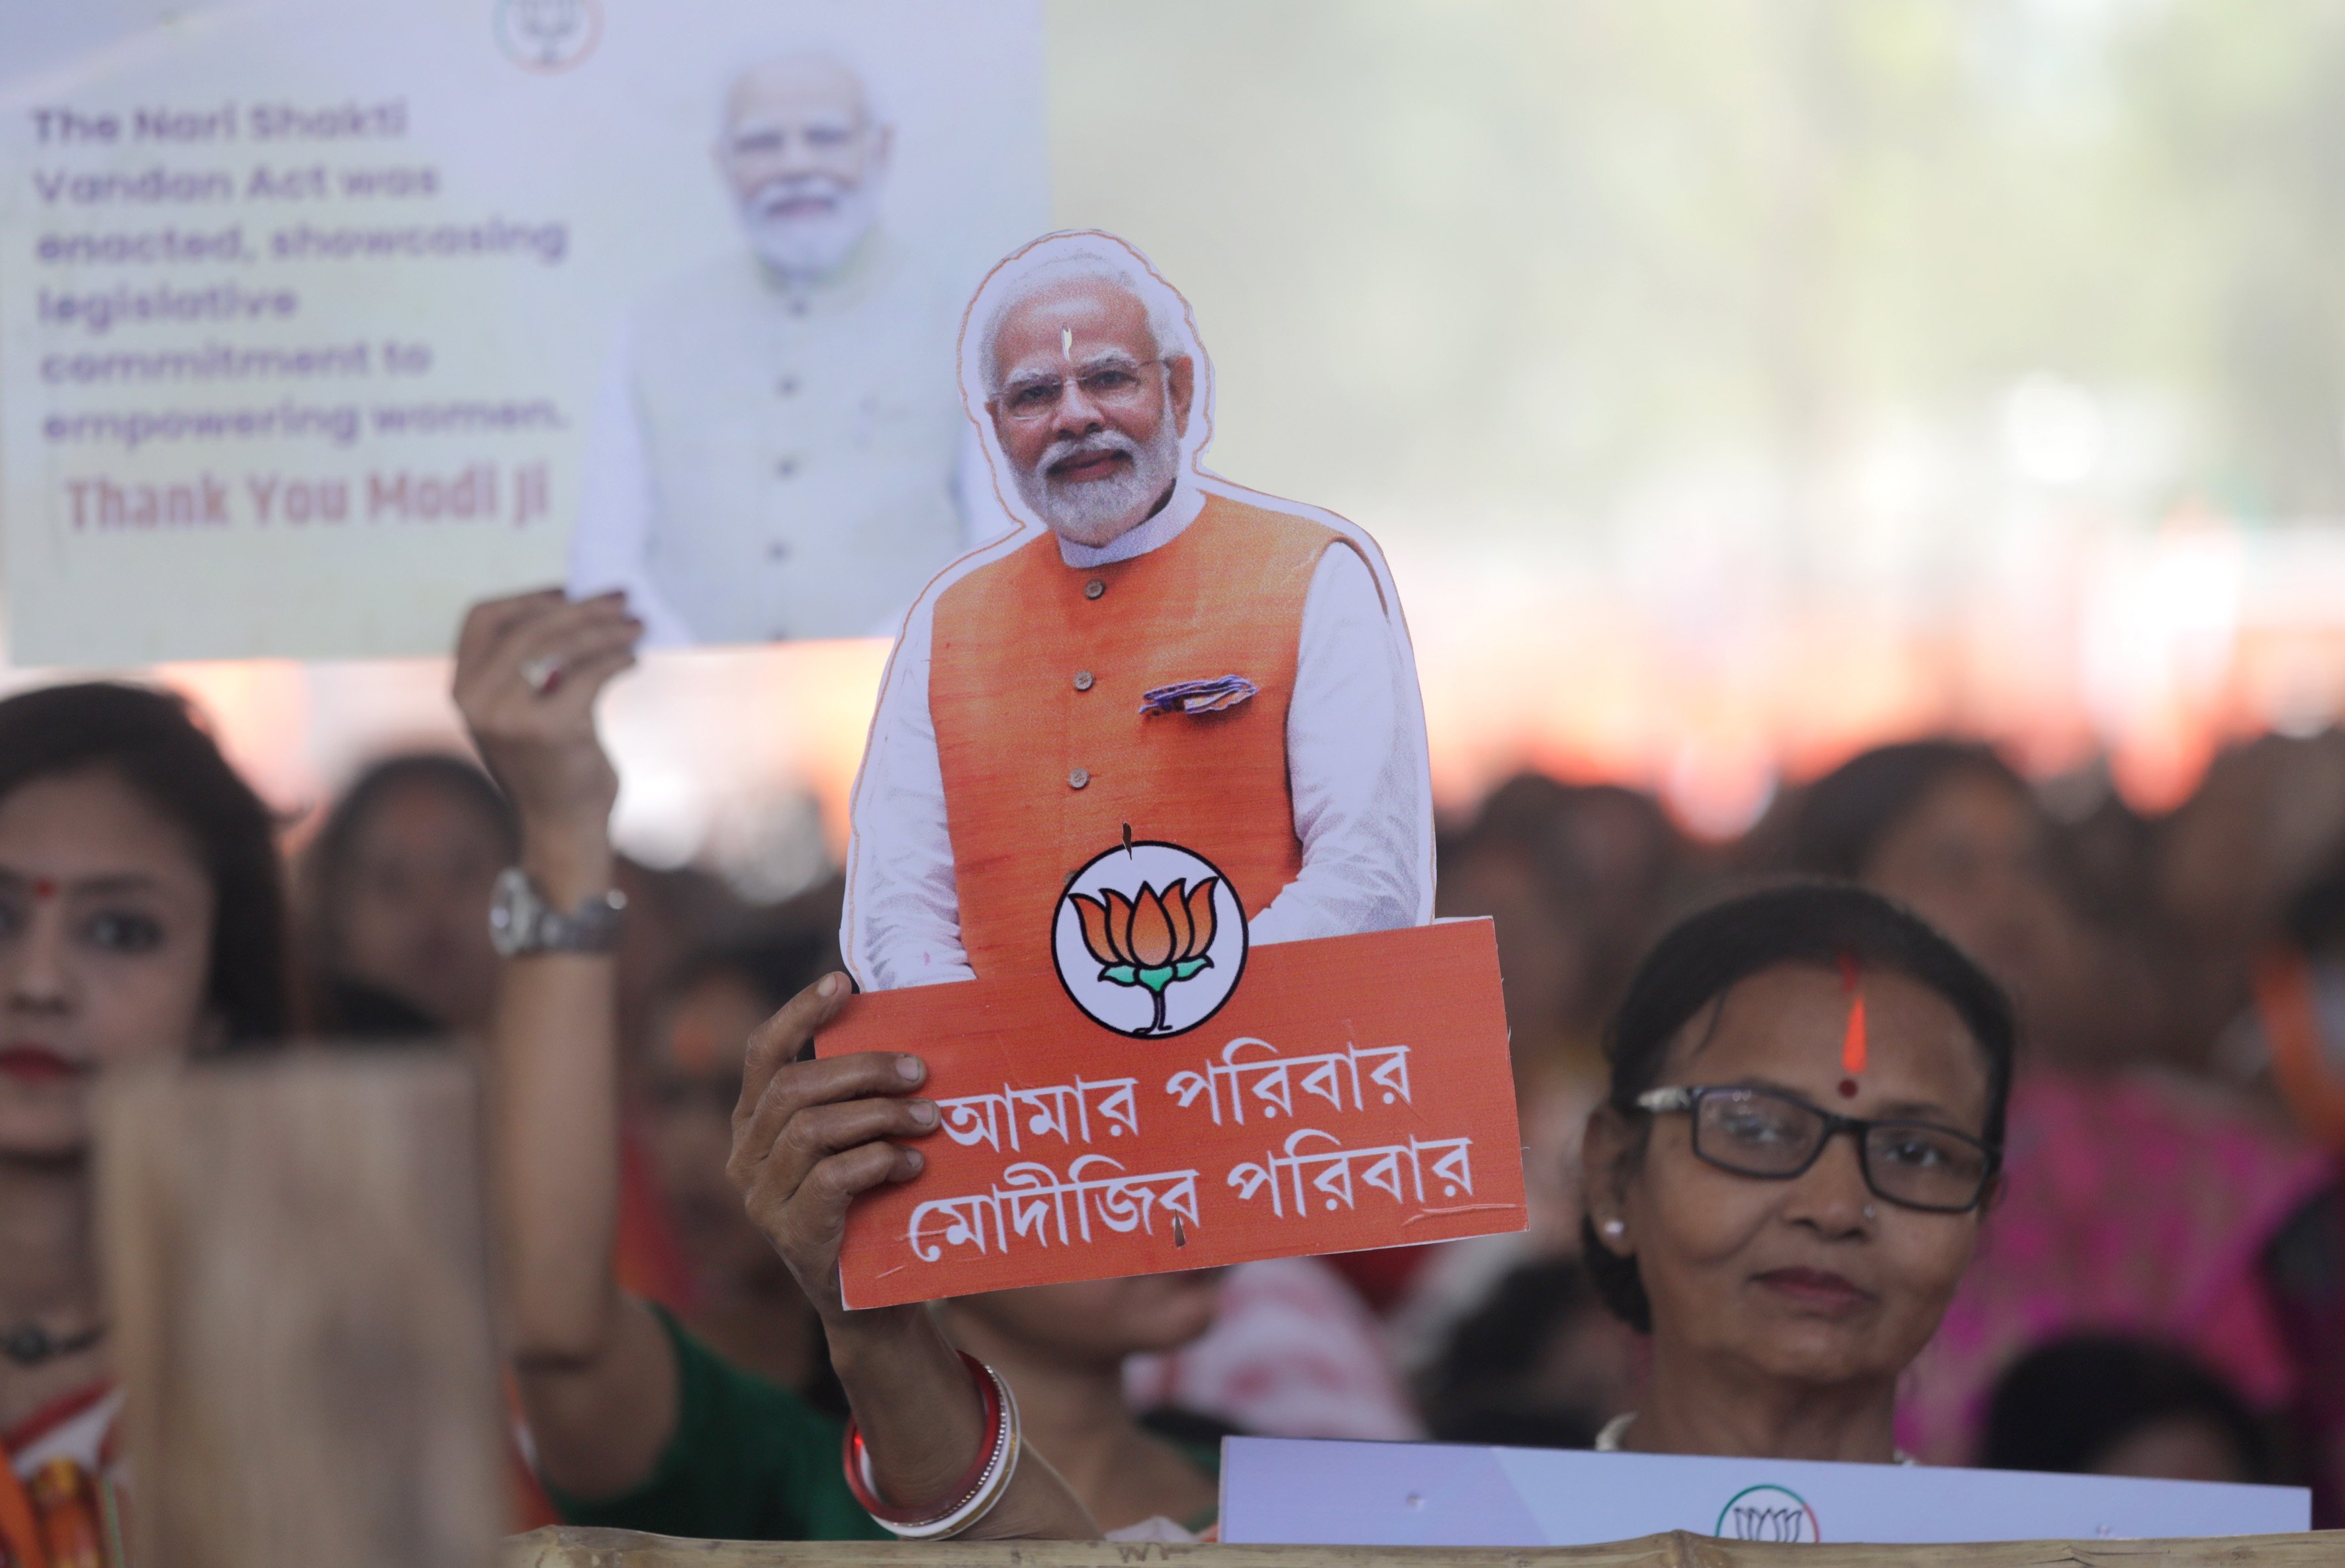 A Bharatiya Janata Party supporter holds up a cutout of Indian Prime Minister Narendra Modi in Kolkata on March 6. Photo: EPA-EFE